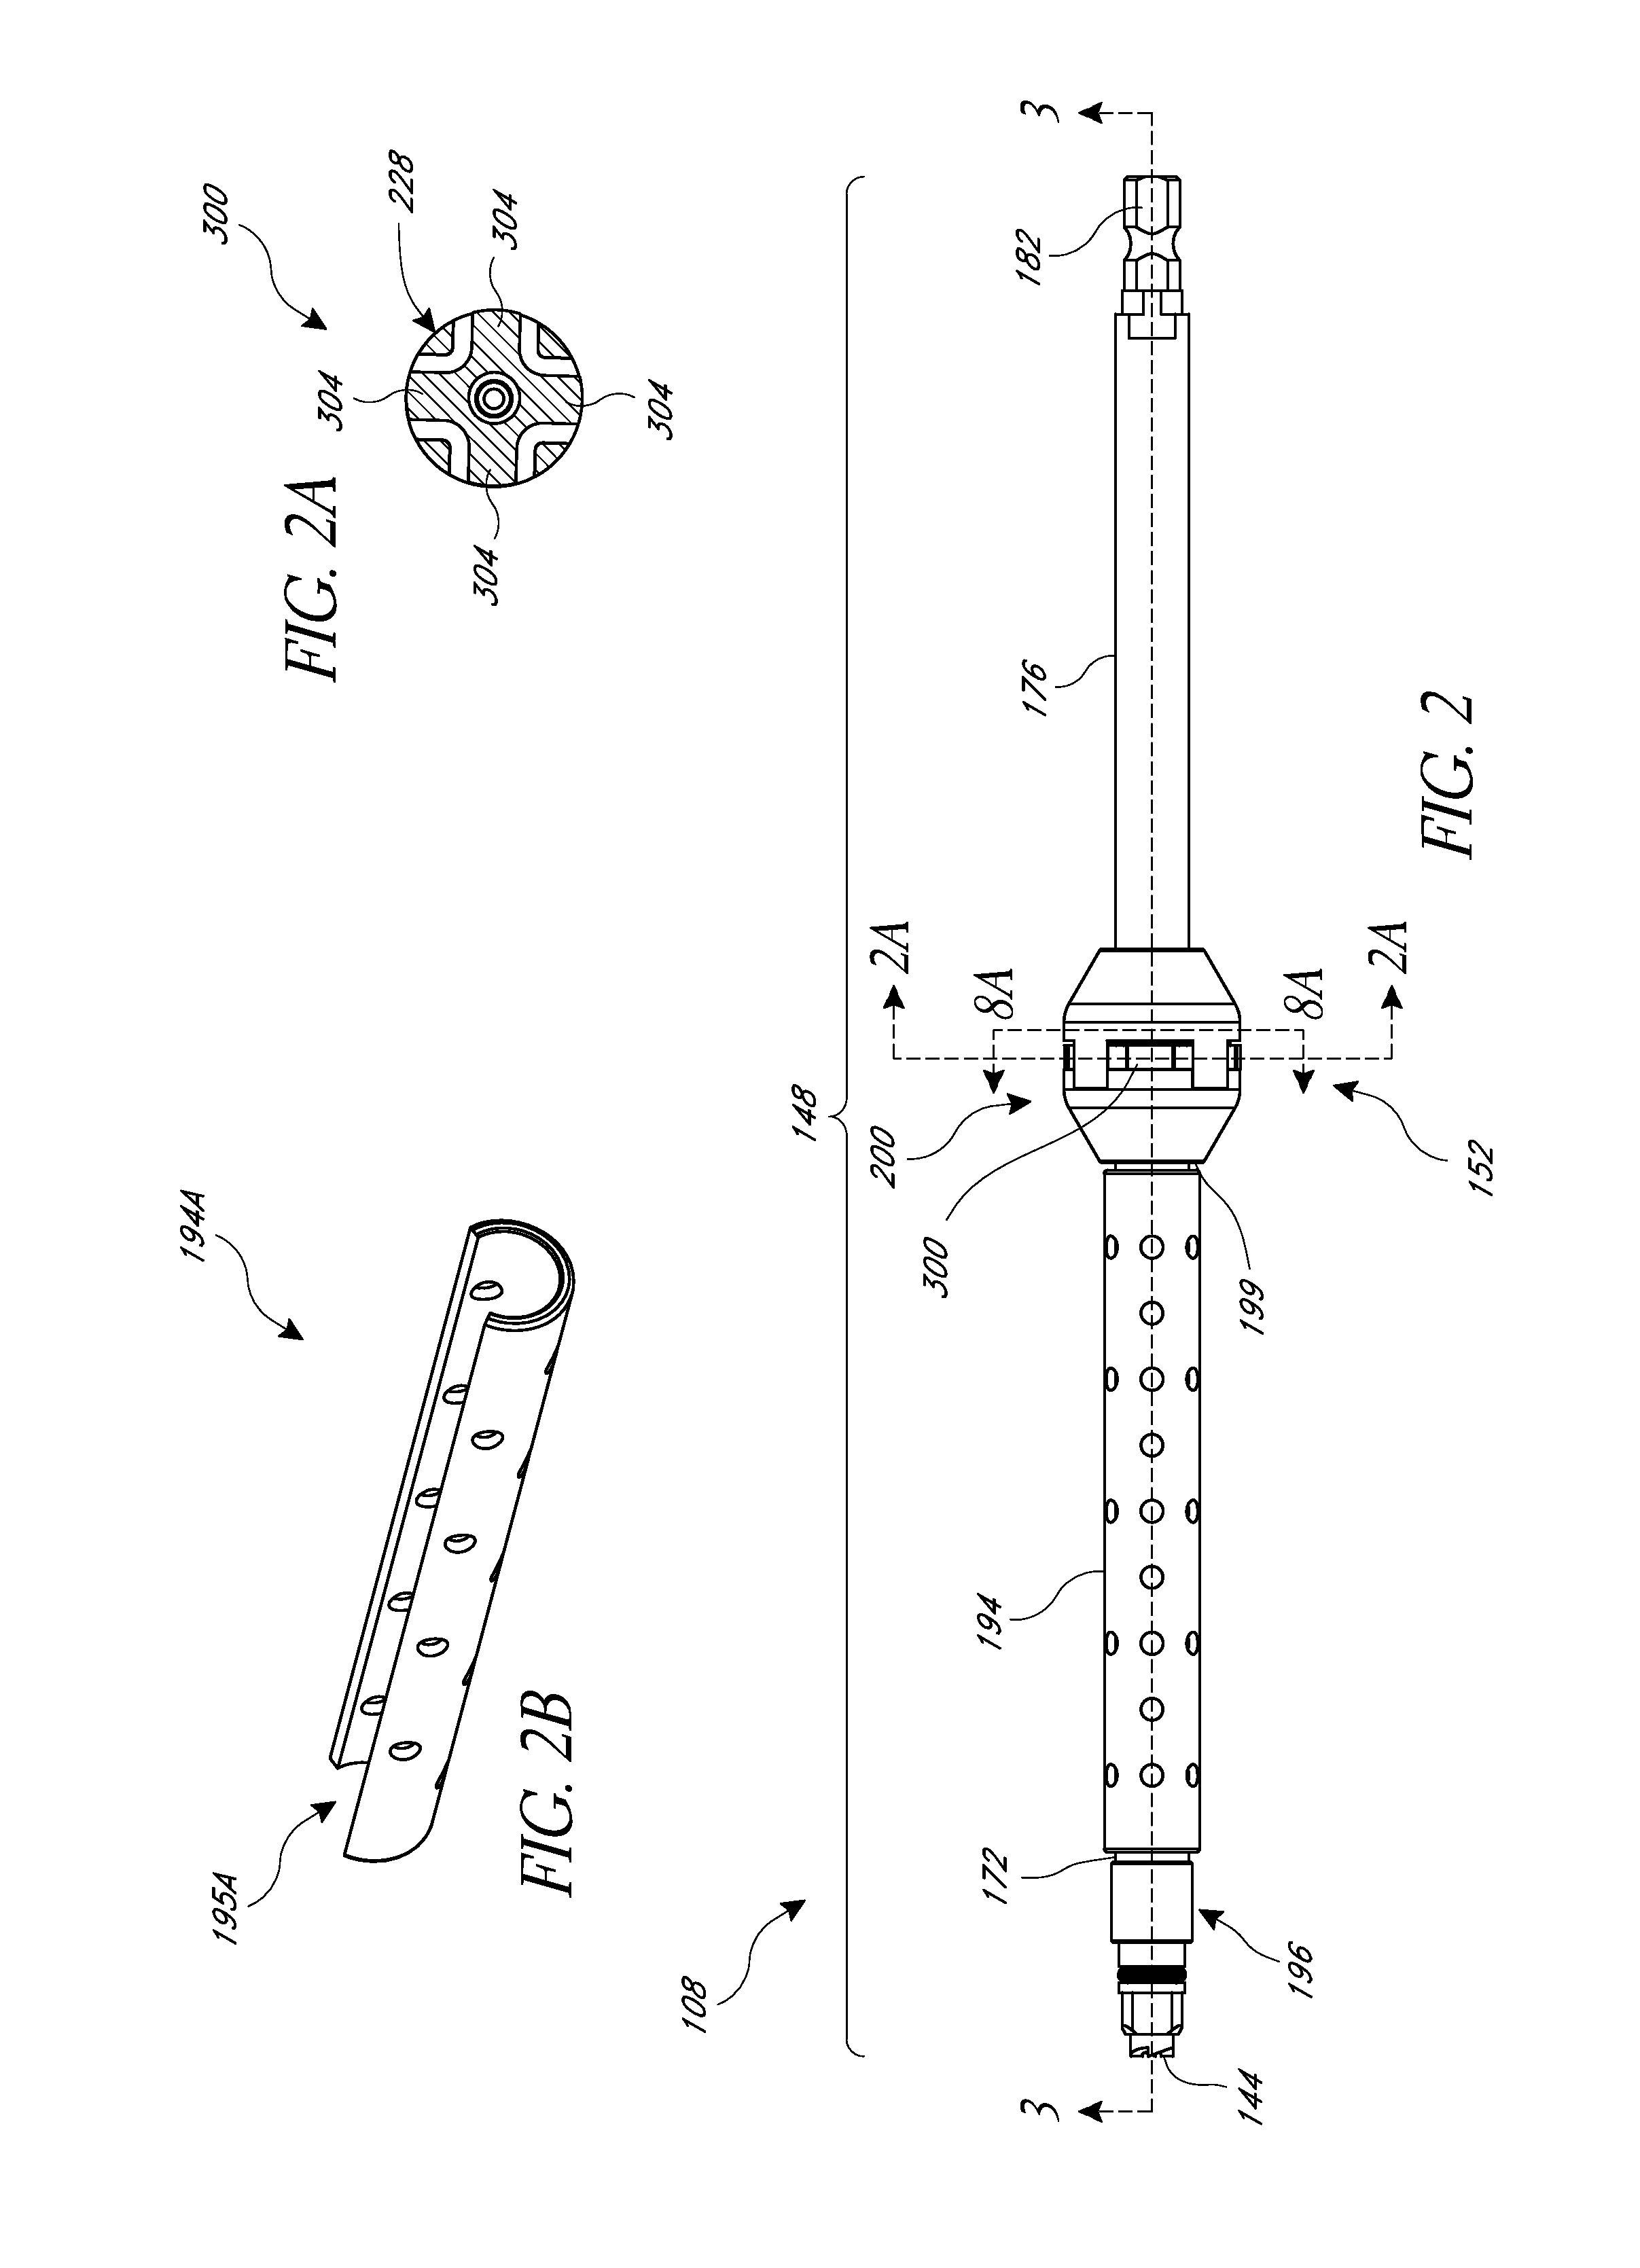 Device for maintaining alignment of a cannulated shaft over a guide pin